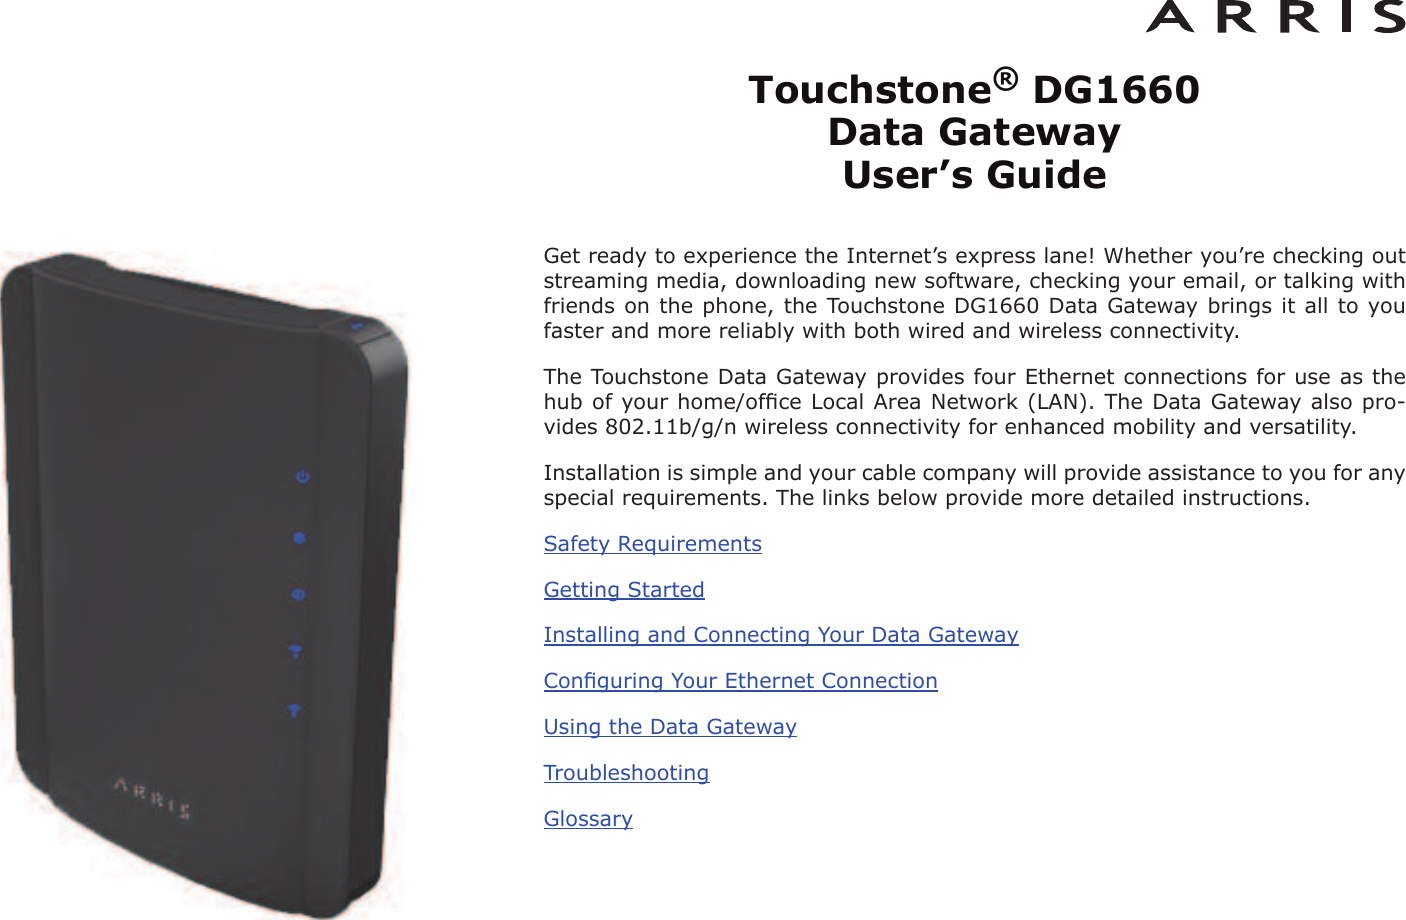 Touchstone®DG1660 Data Gateway User’s GuideGet ready to experience the Internet’s express lane! Whether you’re checking outstreaming media, downloading new software, checking your email, or talking withfriends on the phone, the Touchstone DG1660 Data Gateway brings it all to youfaster and more reliably with both wired and wireless connectivity.The Touchstone Data Gateway provides four Ethernet connections for use as thehub of your home/ofﬁce Local Area Network (LAN). The Data Gateway also pro-vides 802.11b/g/n wireless connectivity for enhanced mobility and versatility.Installation is simple and your cable company will provide assistance to you for anyspecial requirements. The links below provide more detailed instructions.Safety RequirementsGetting StartedInstalling and Connecting Your Data GatewayConﬁguring Your Ethernet ConnectionUsing the Data GatewayTroubleshootingGlossary